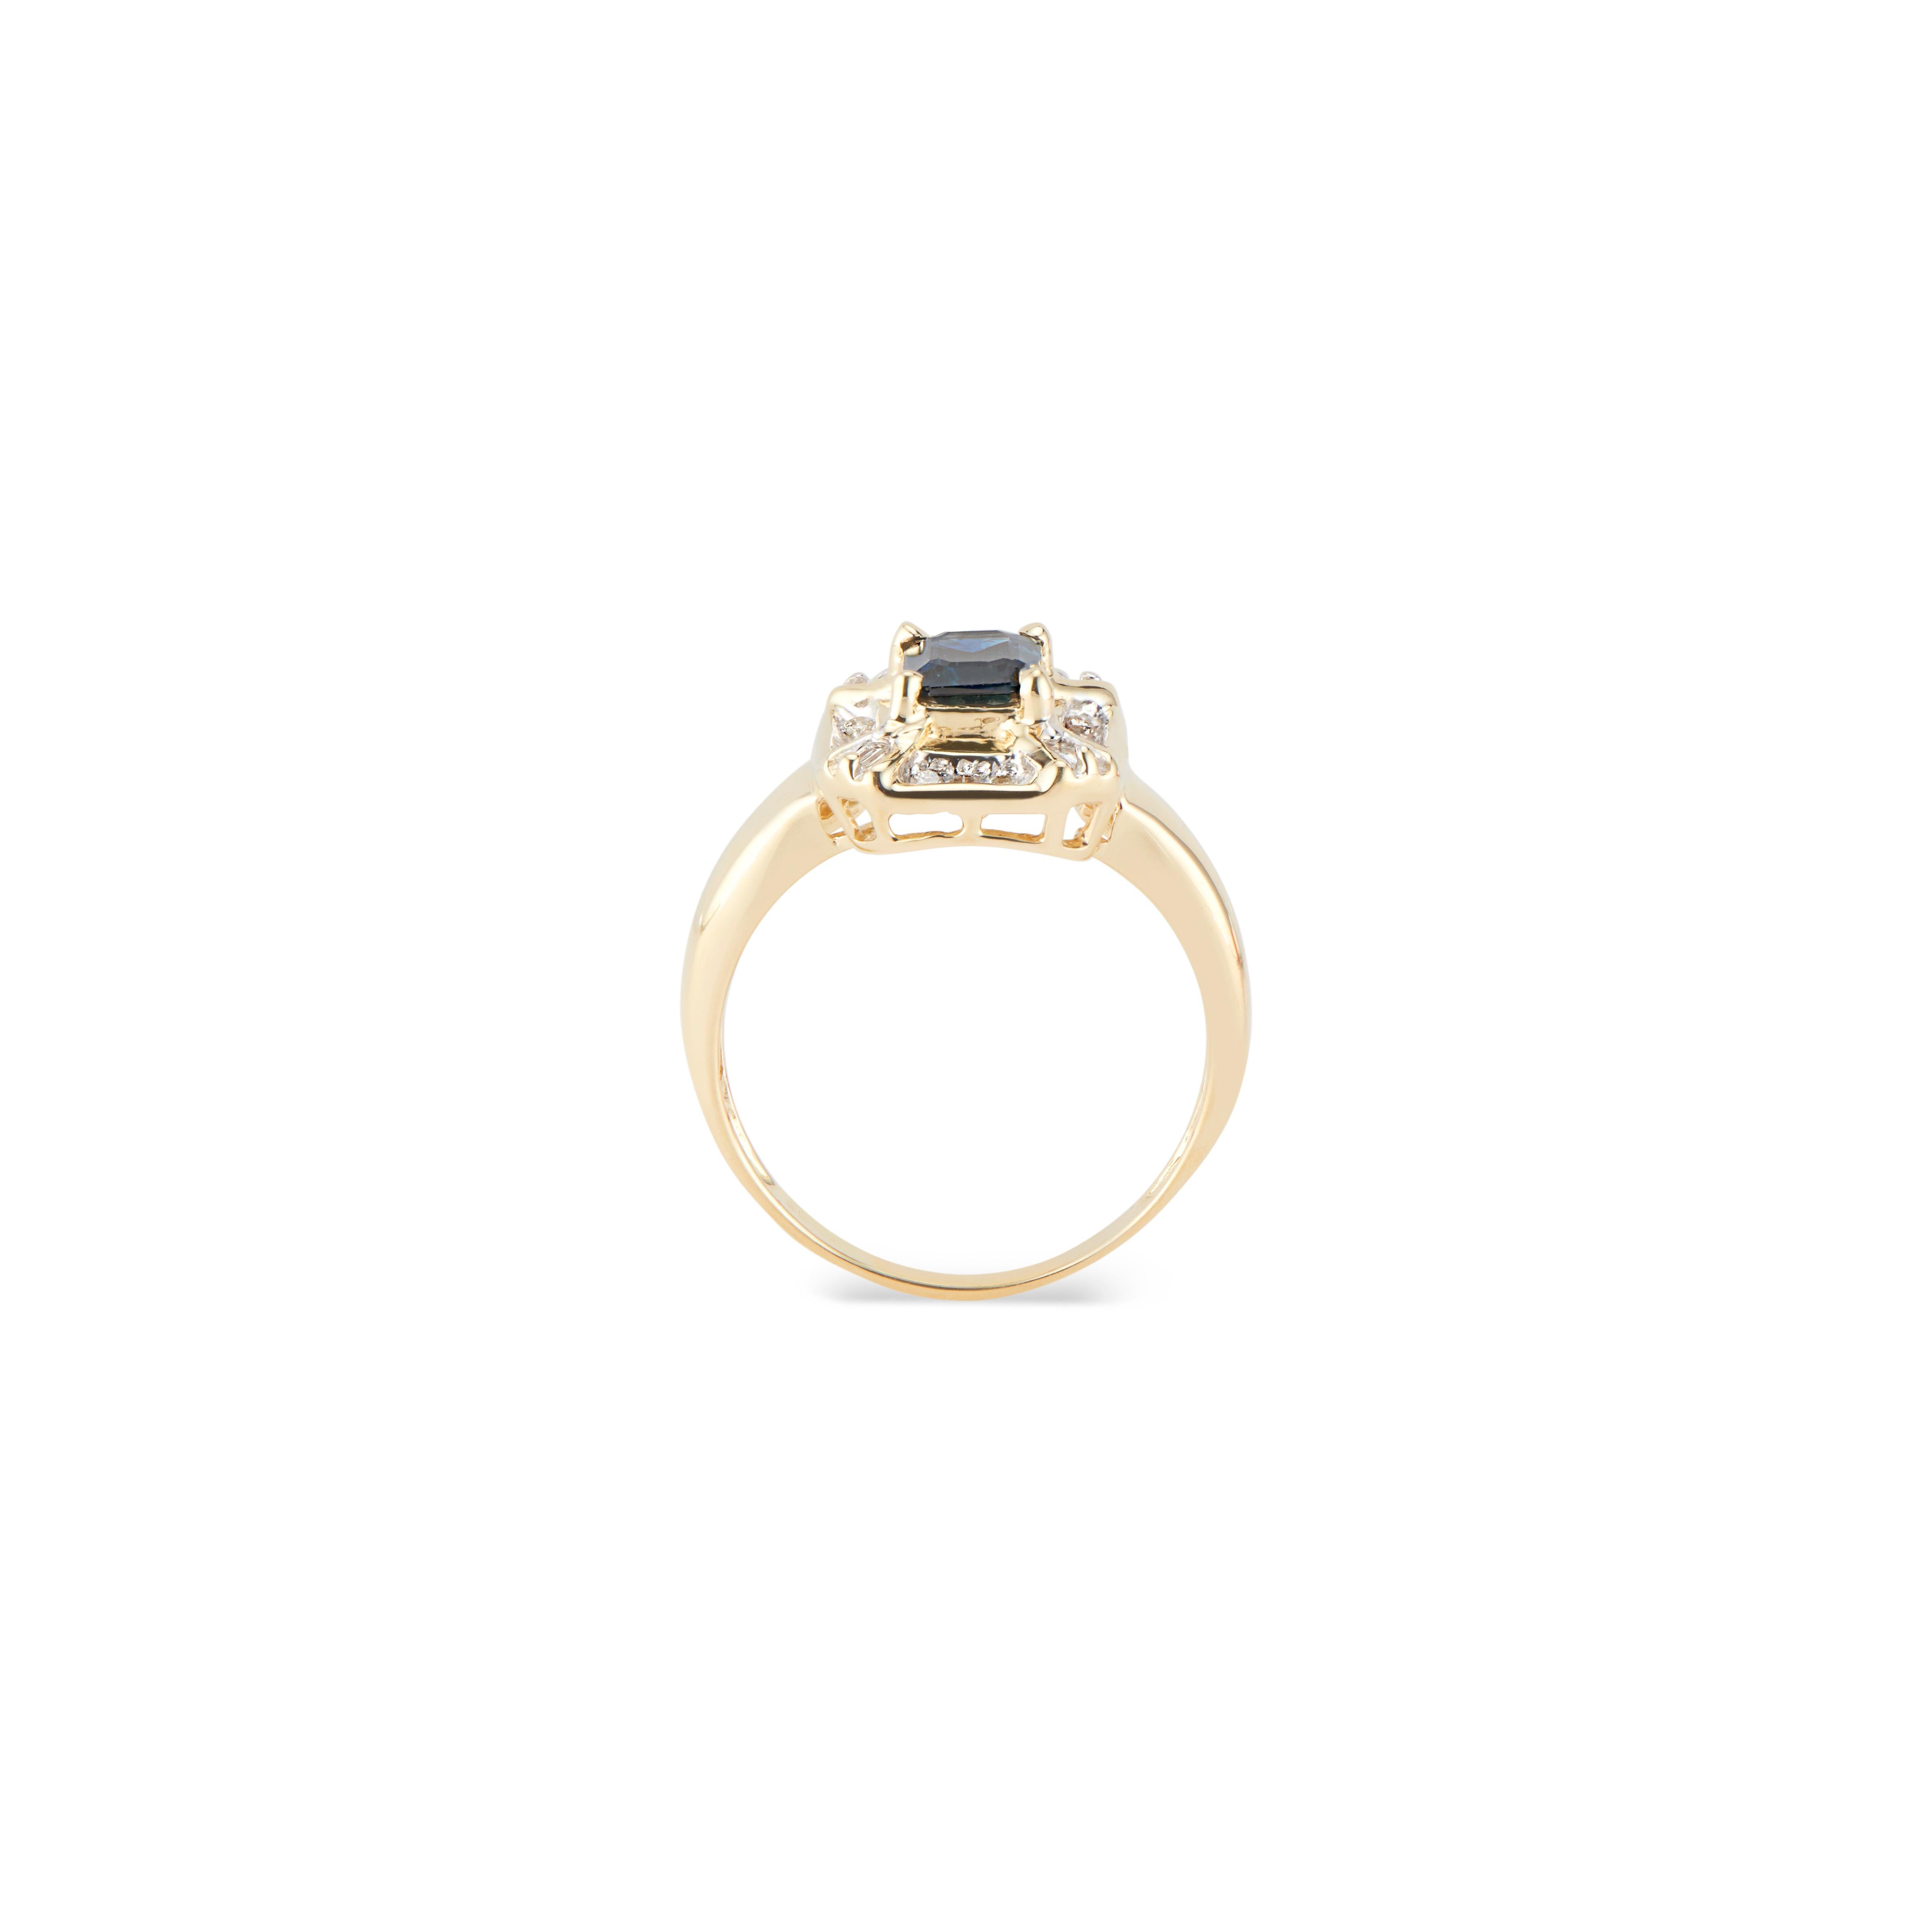 Contemporary Vintage 14K Yellow Gold Diamond and Emerald Cut Sapphire Dress Ring For Sale